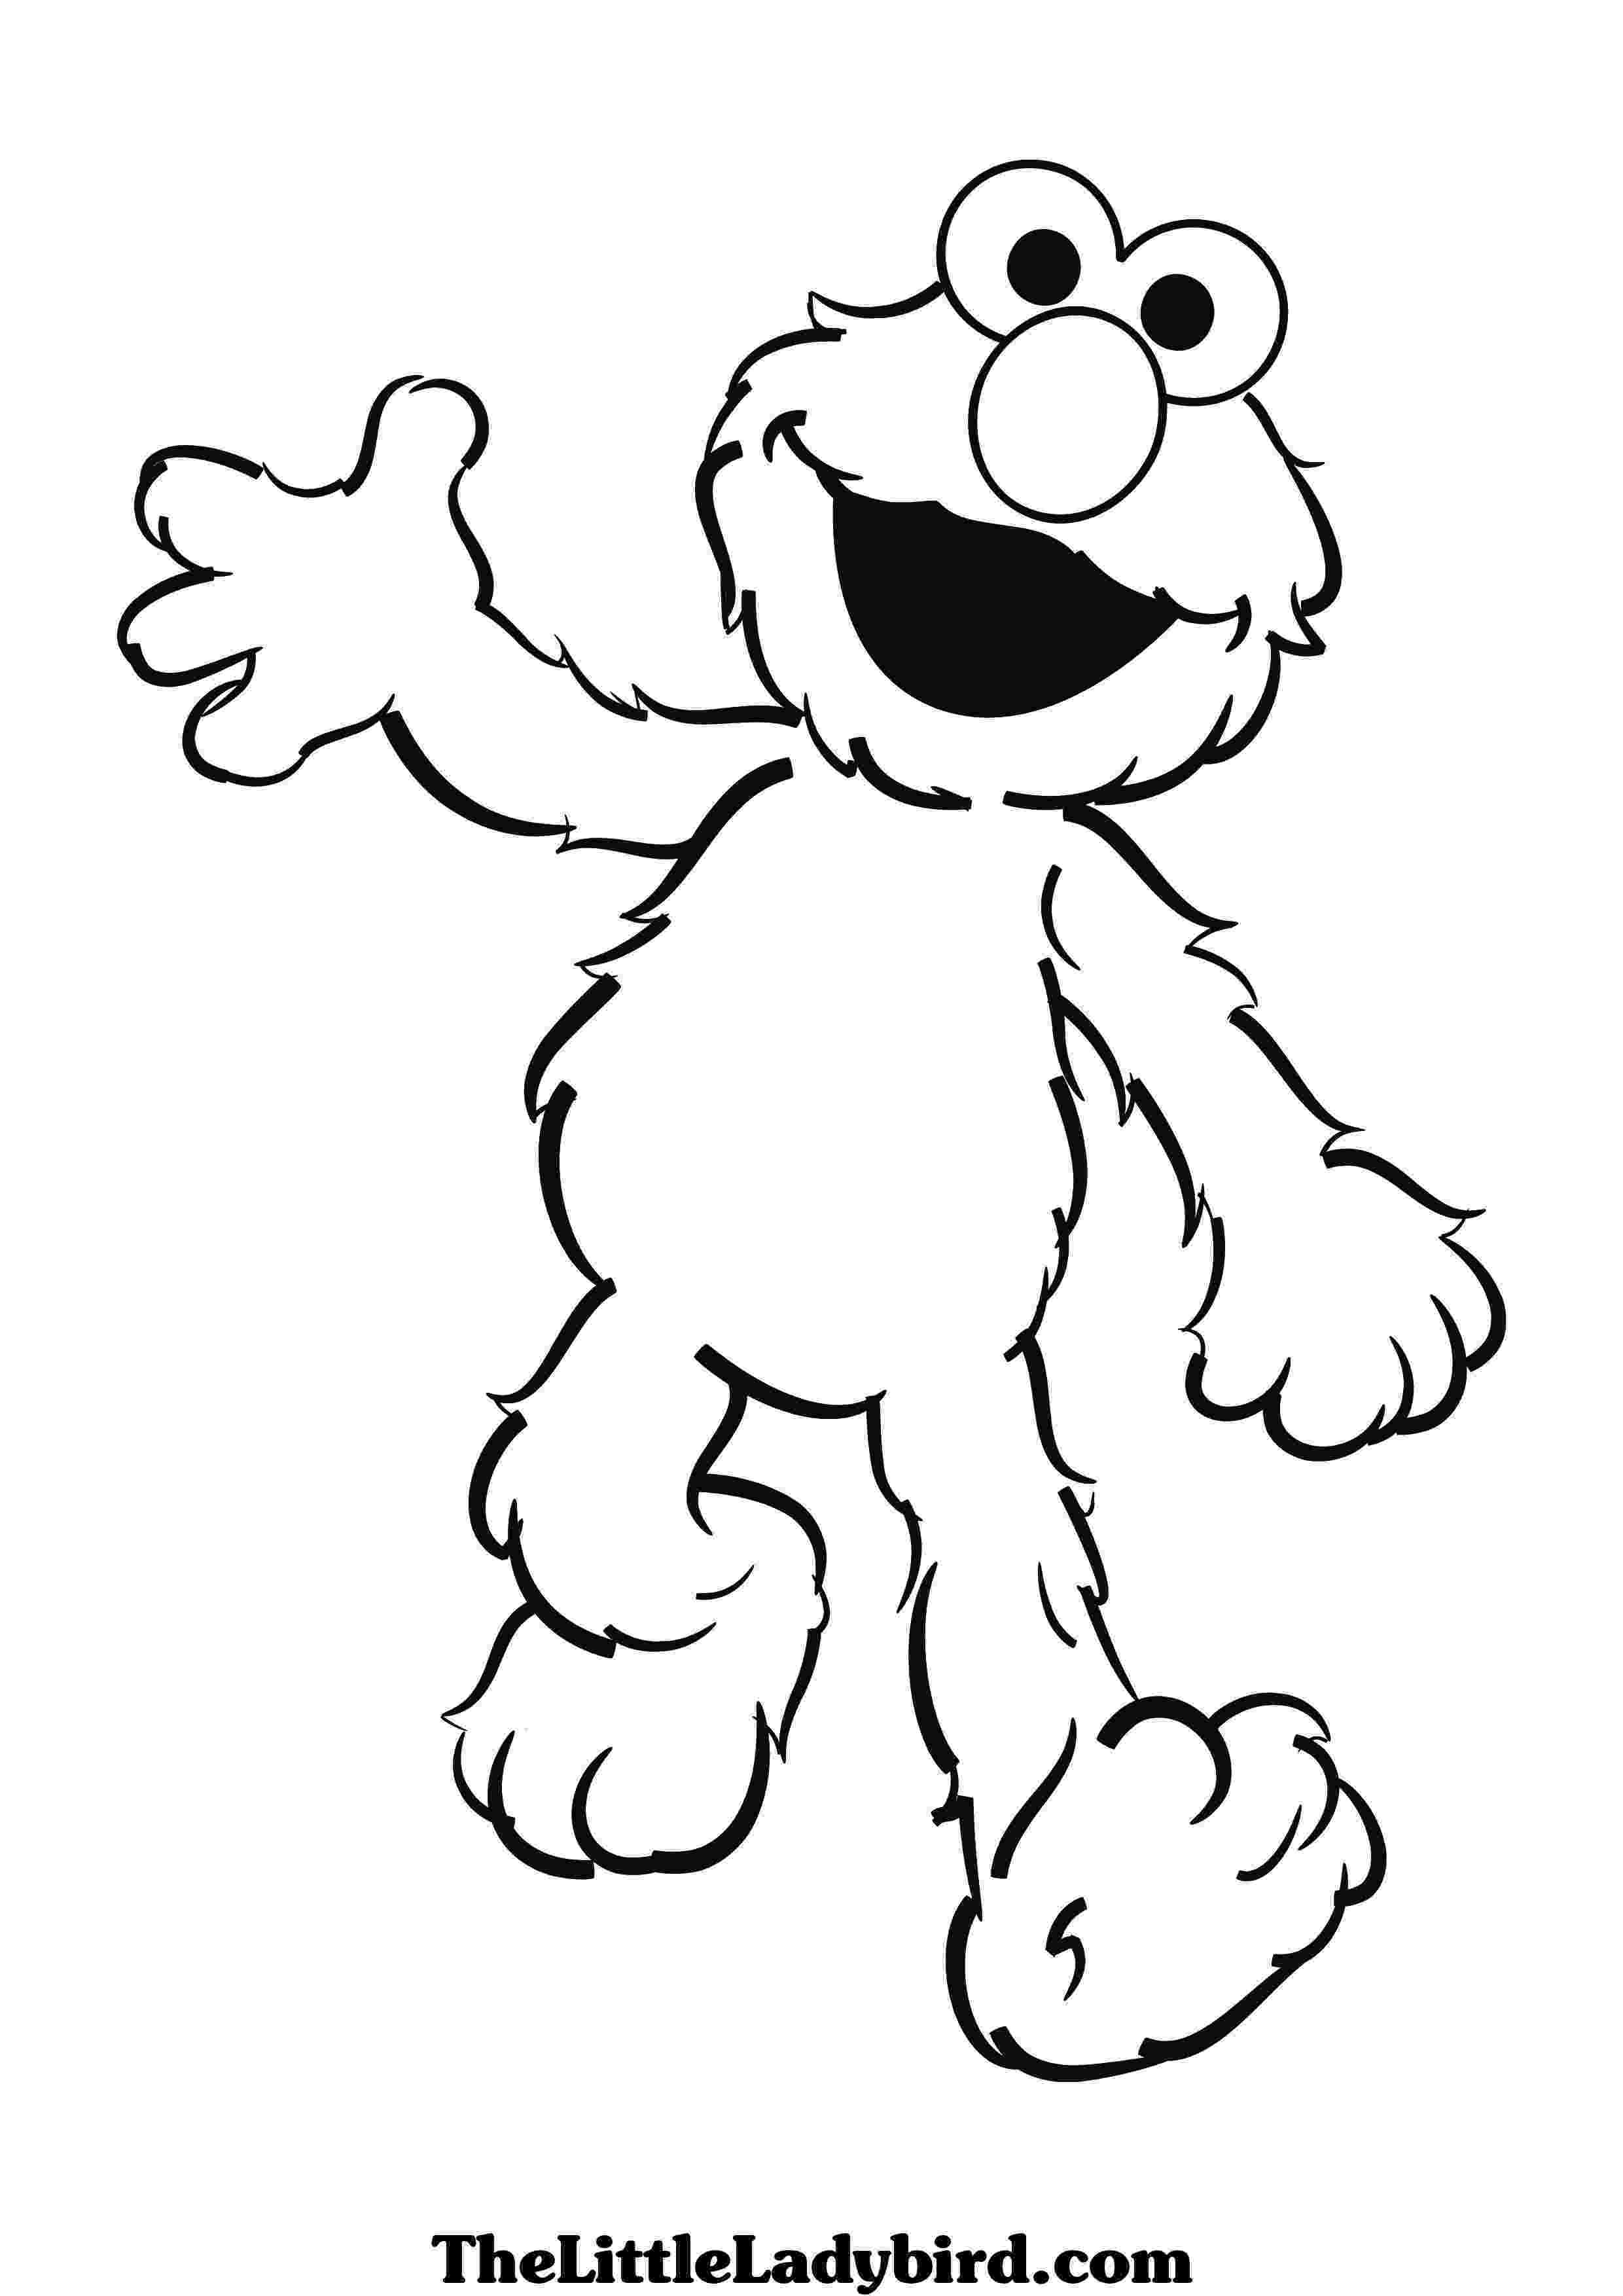 printable elmo pictures elmo coloring pages to download and print for free printable elmo pictures 